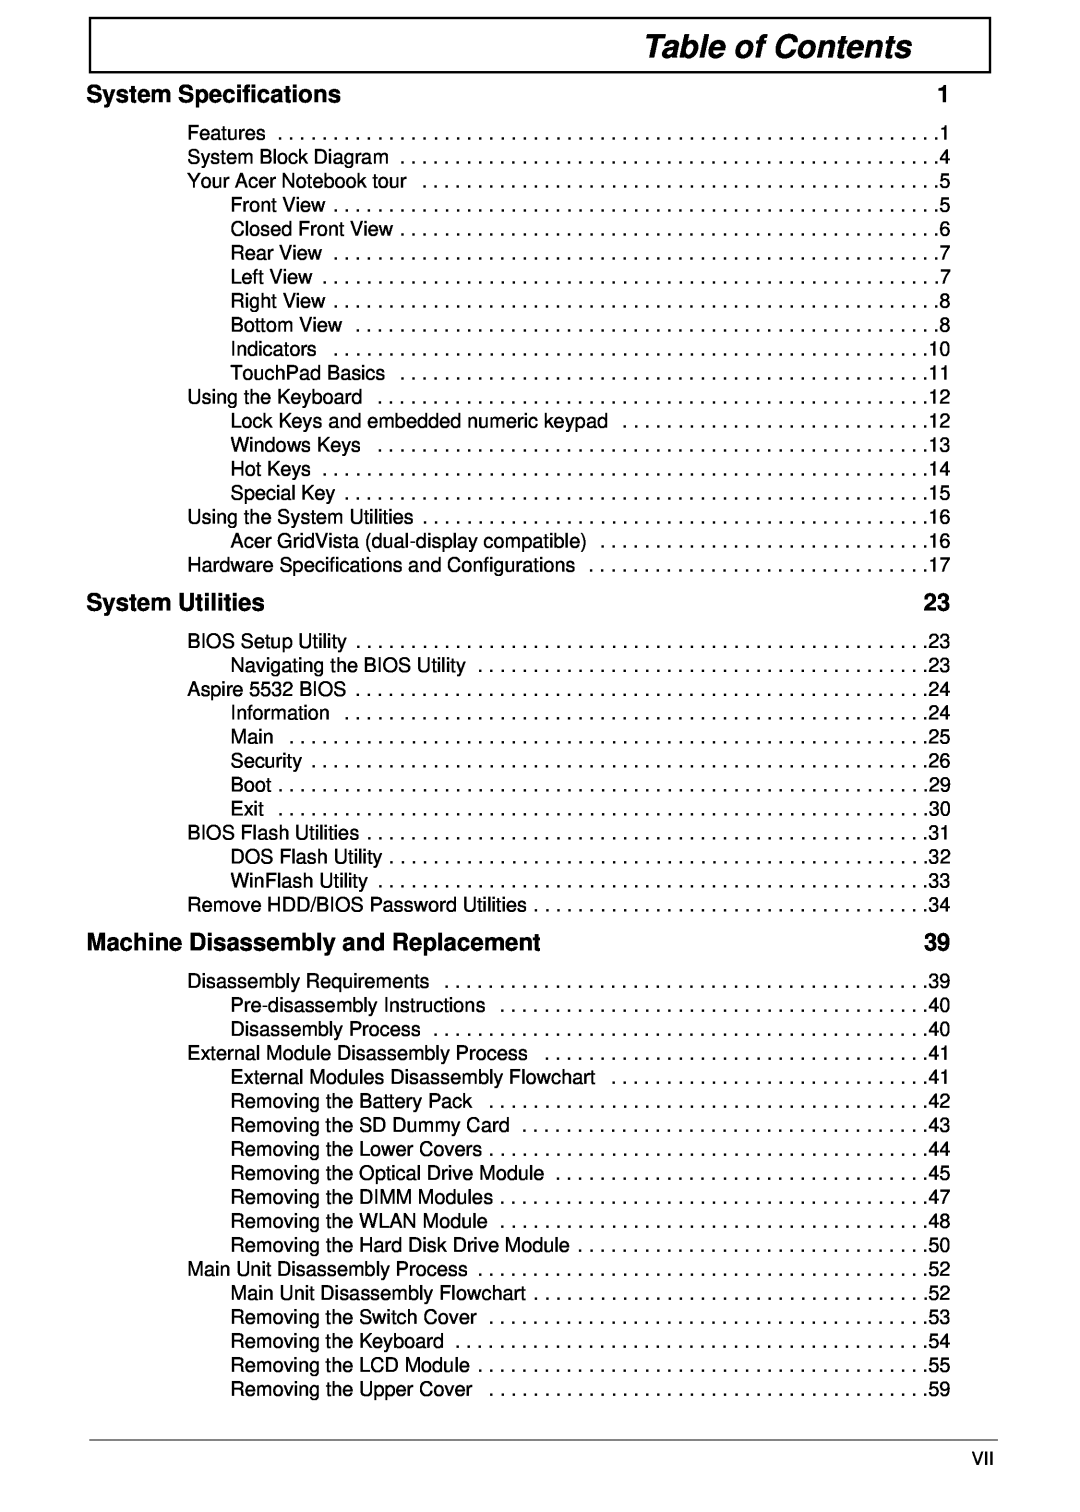 Acer 5532 manual Table of Contents, System Specifications, System Utilities, Machine Disassembly and Replacement 